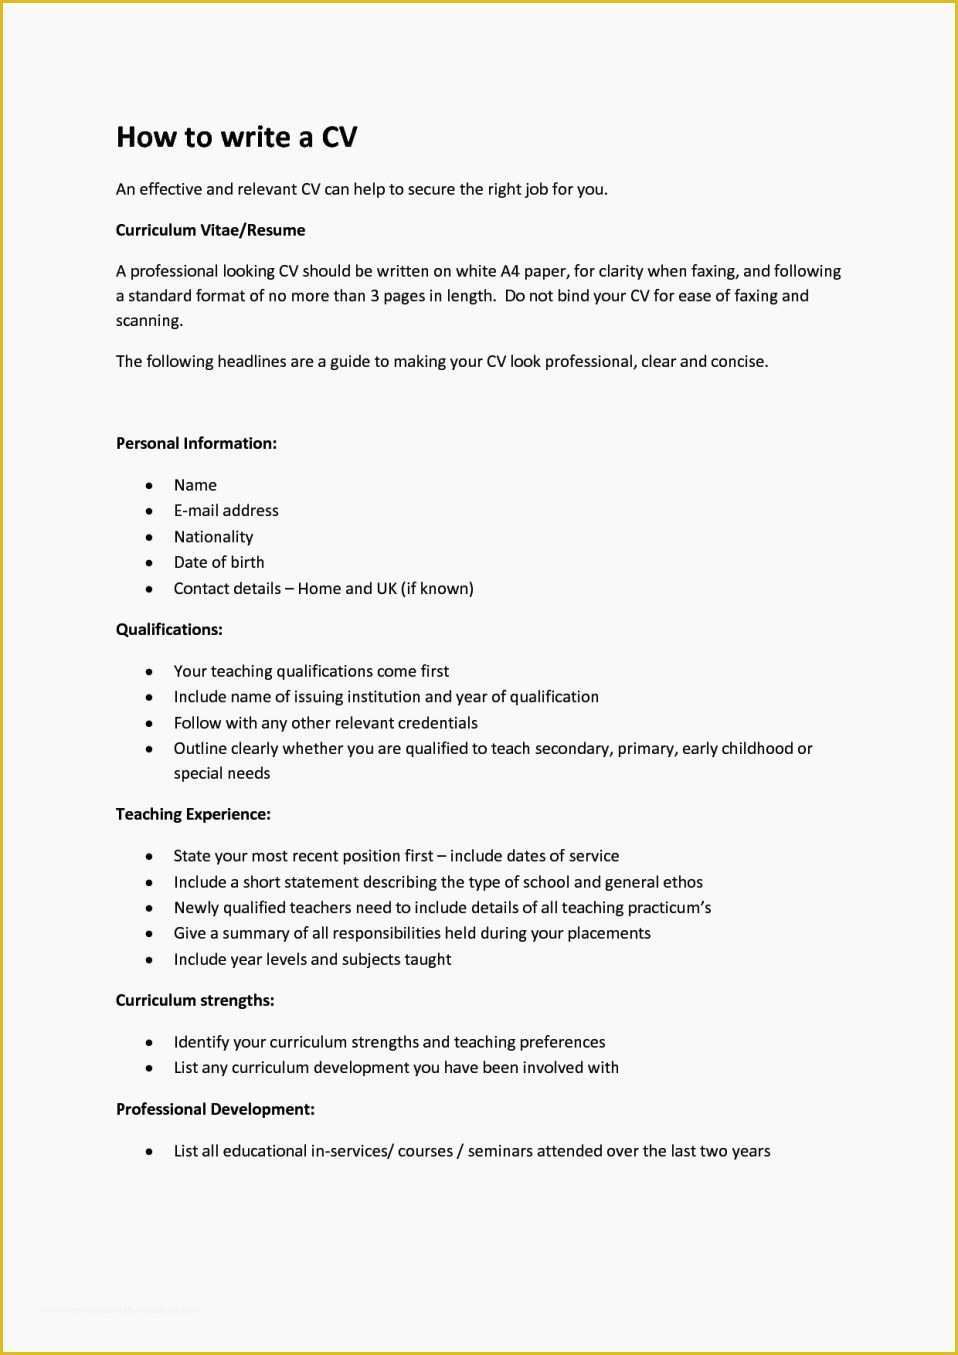 How to Make A Resume Free Template Of How to Write A Cv for A 16 Year Old with No Experience Uk